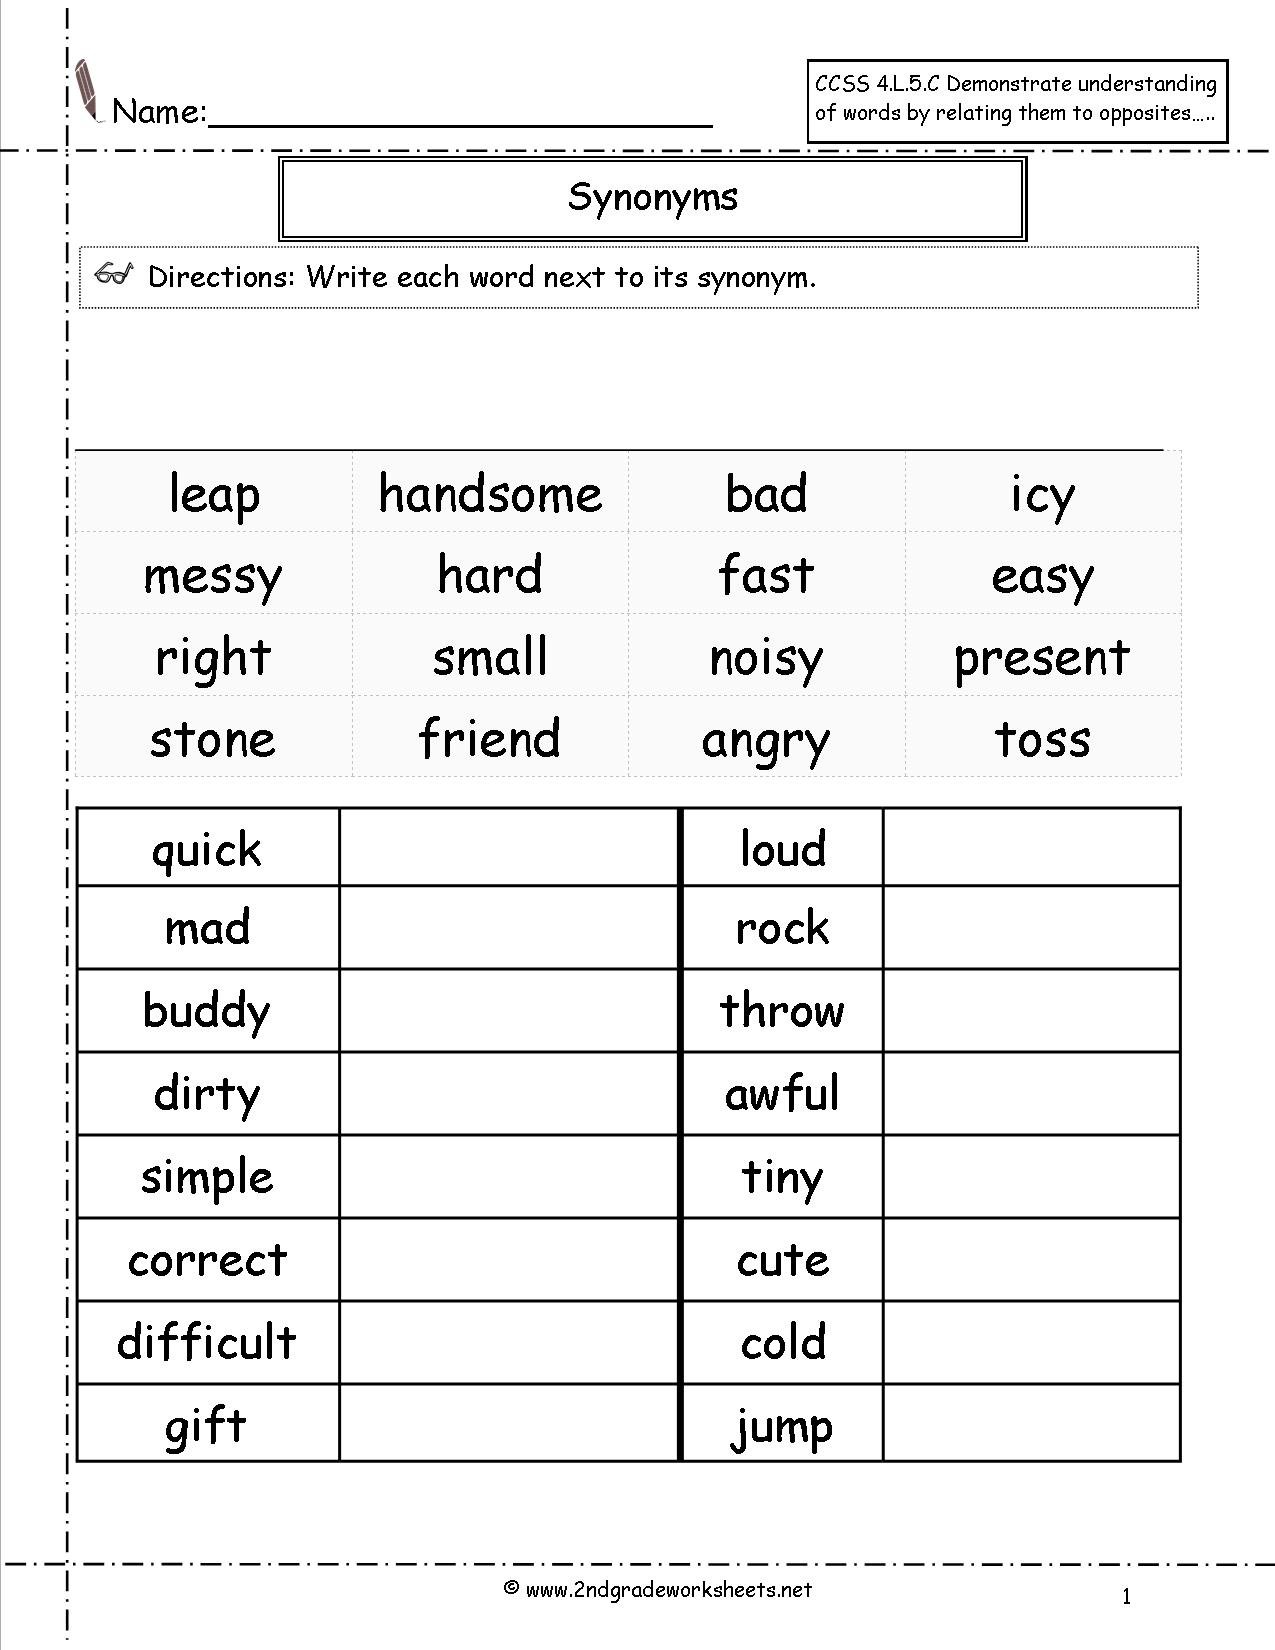 Synonyms Worksheets Worksheets For All